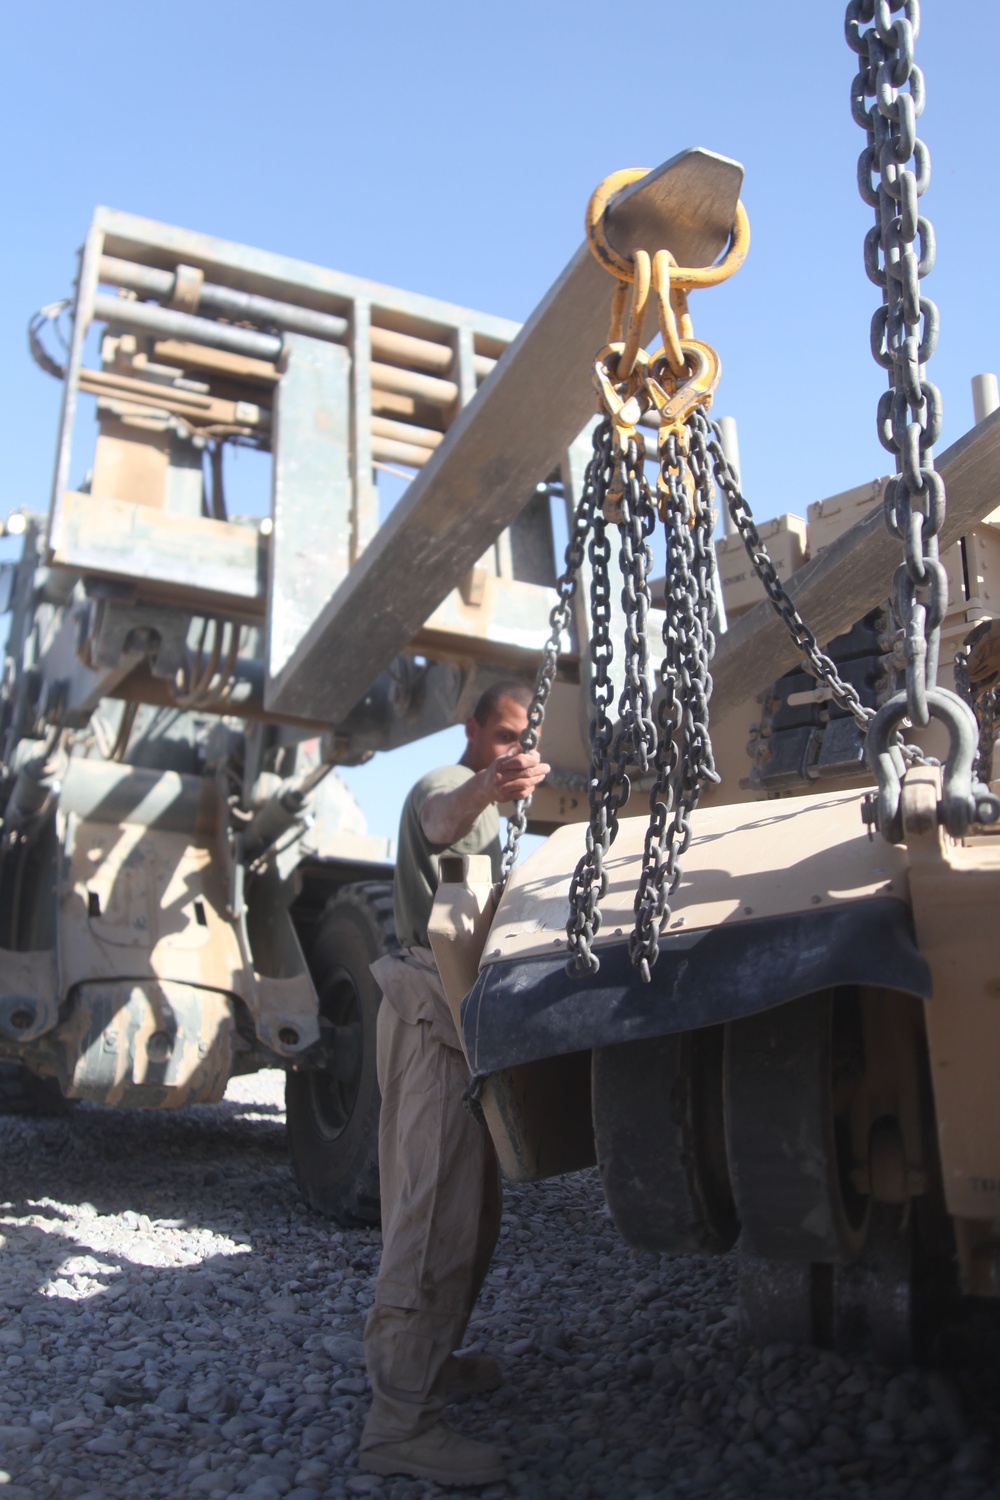 Vehicle maintenance keeps Marines in the fight